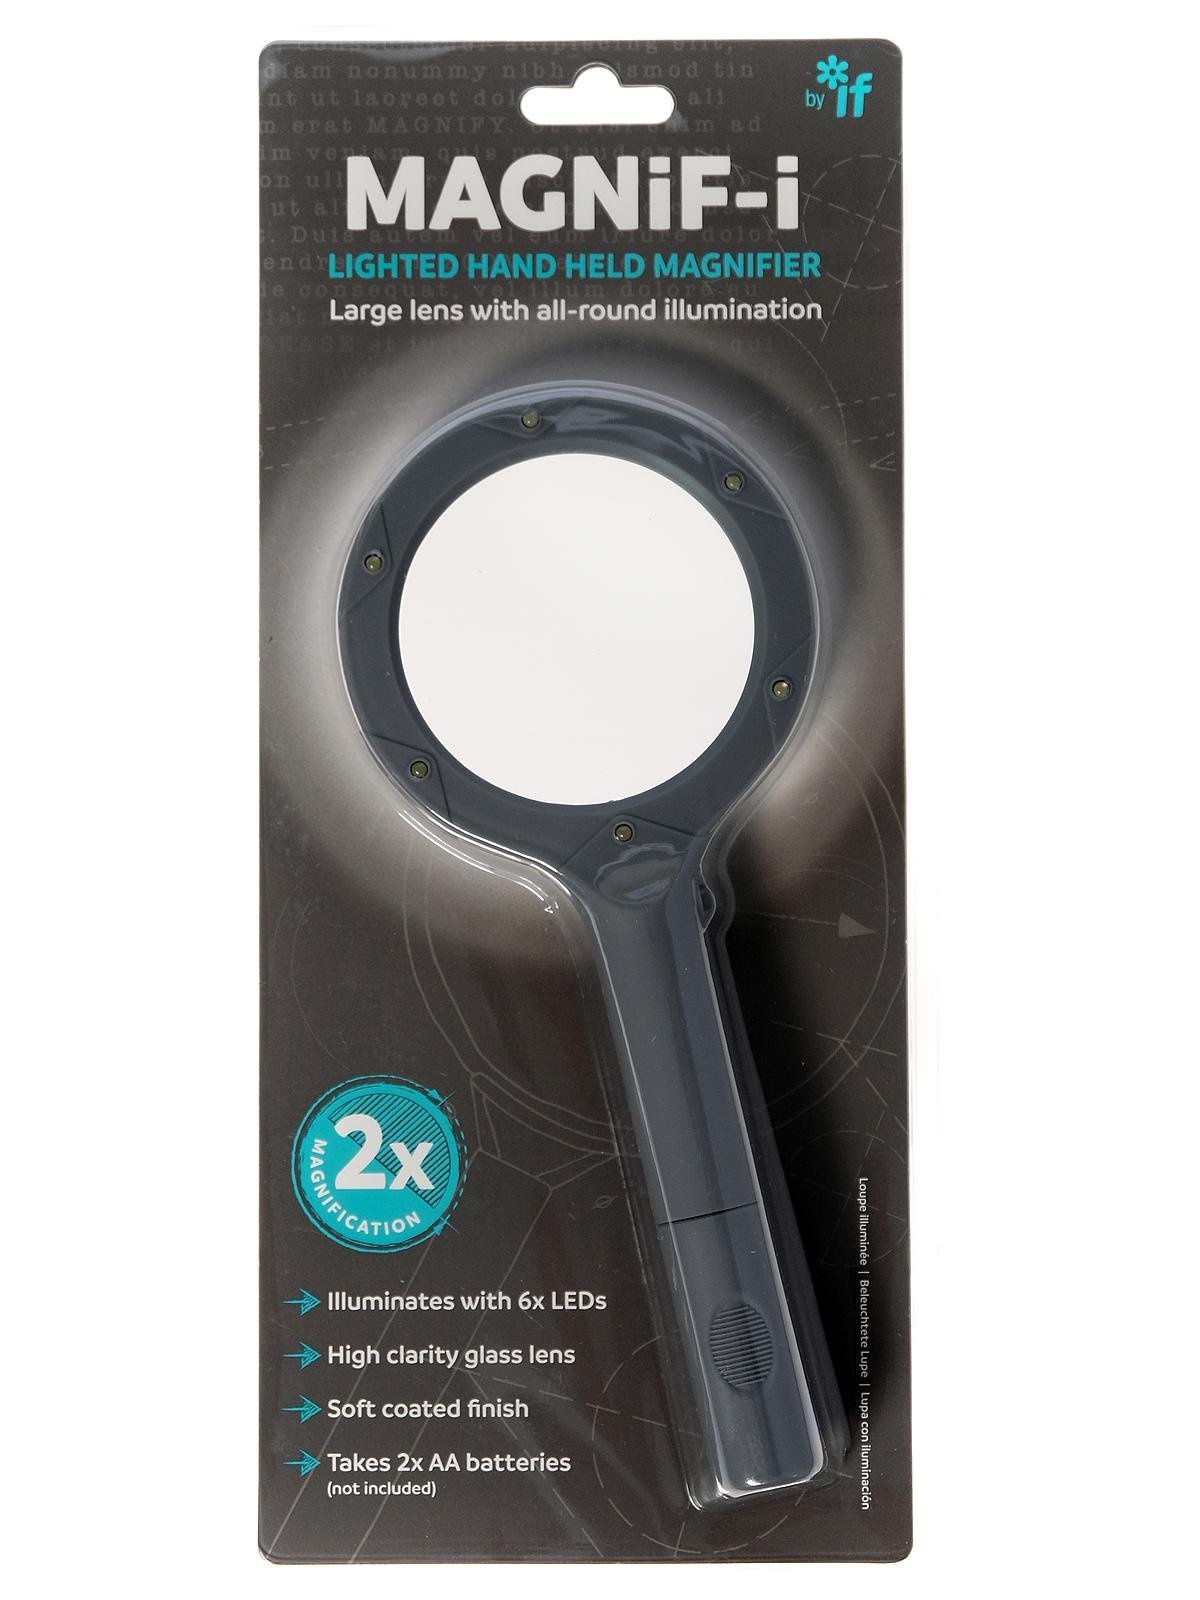 Hand Held Lighted Magnifier